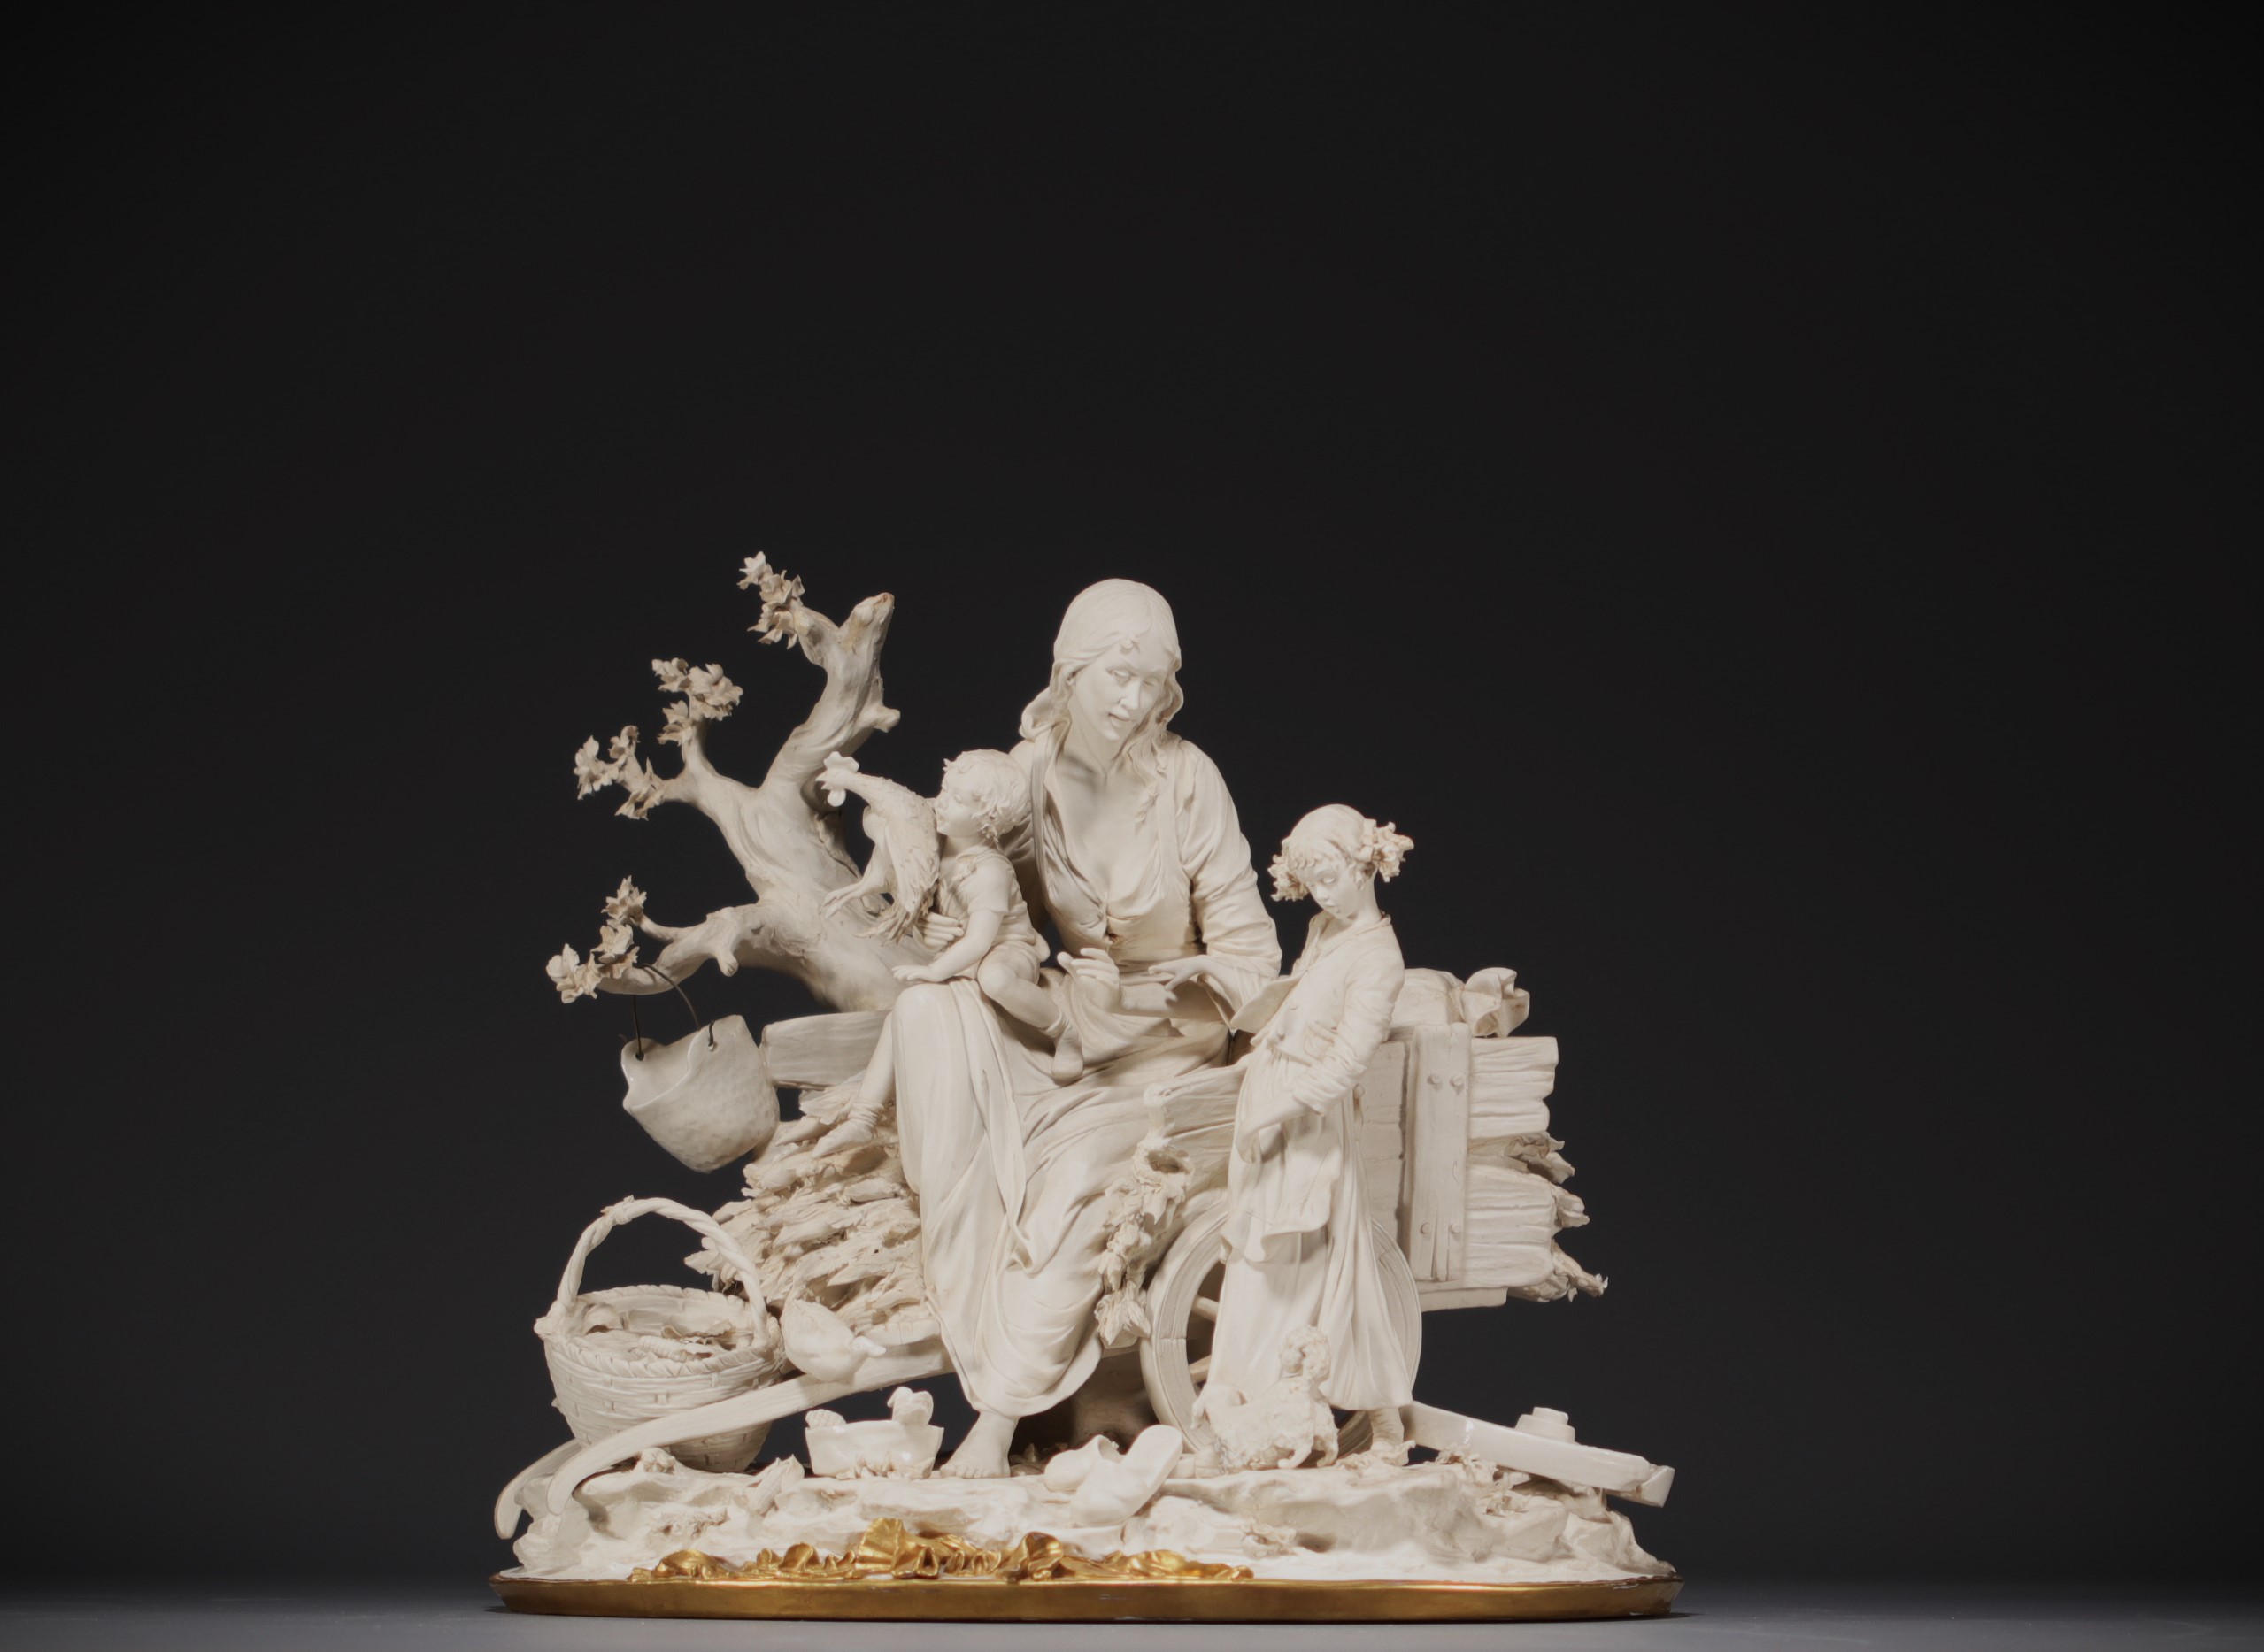 Capodimonte - "The Family" Imposing group in biscuit and enamelled porcelain, blue mark on the base.